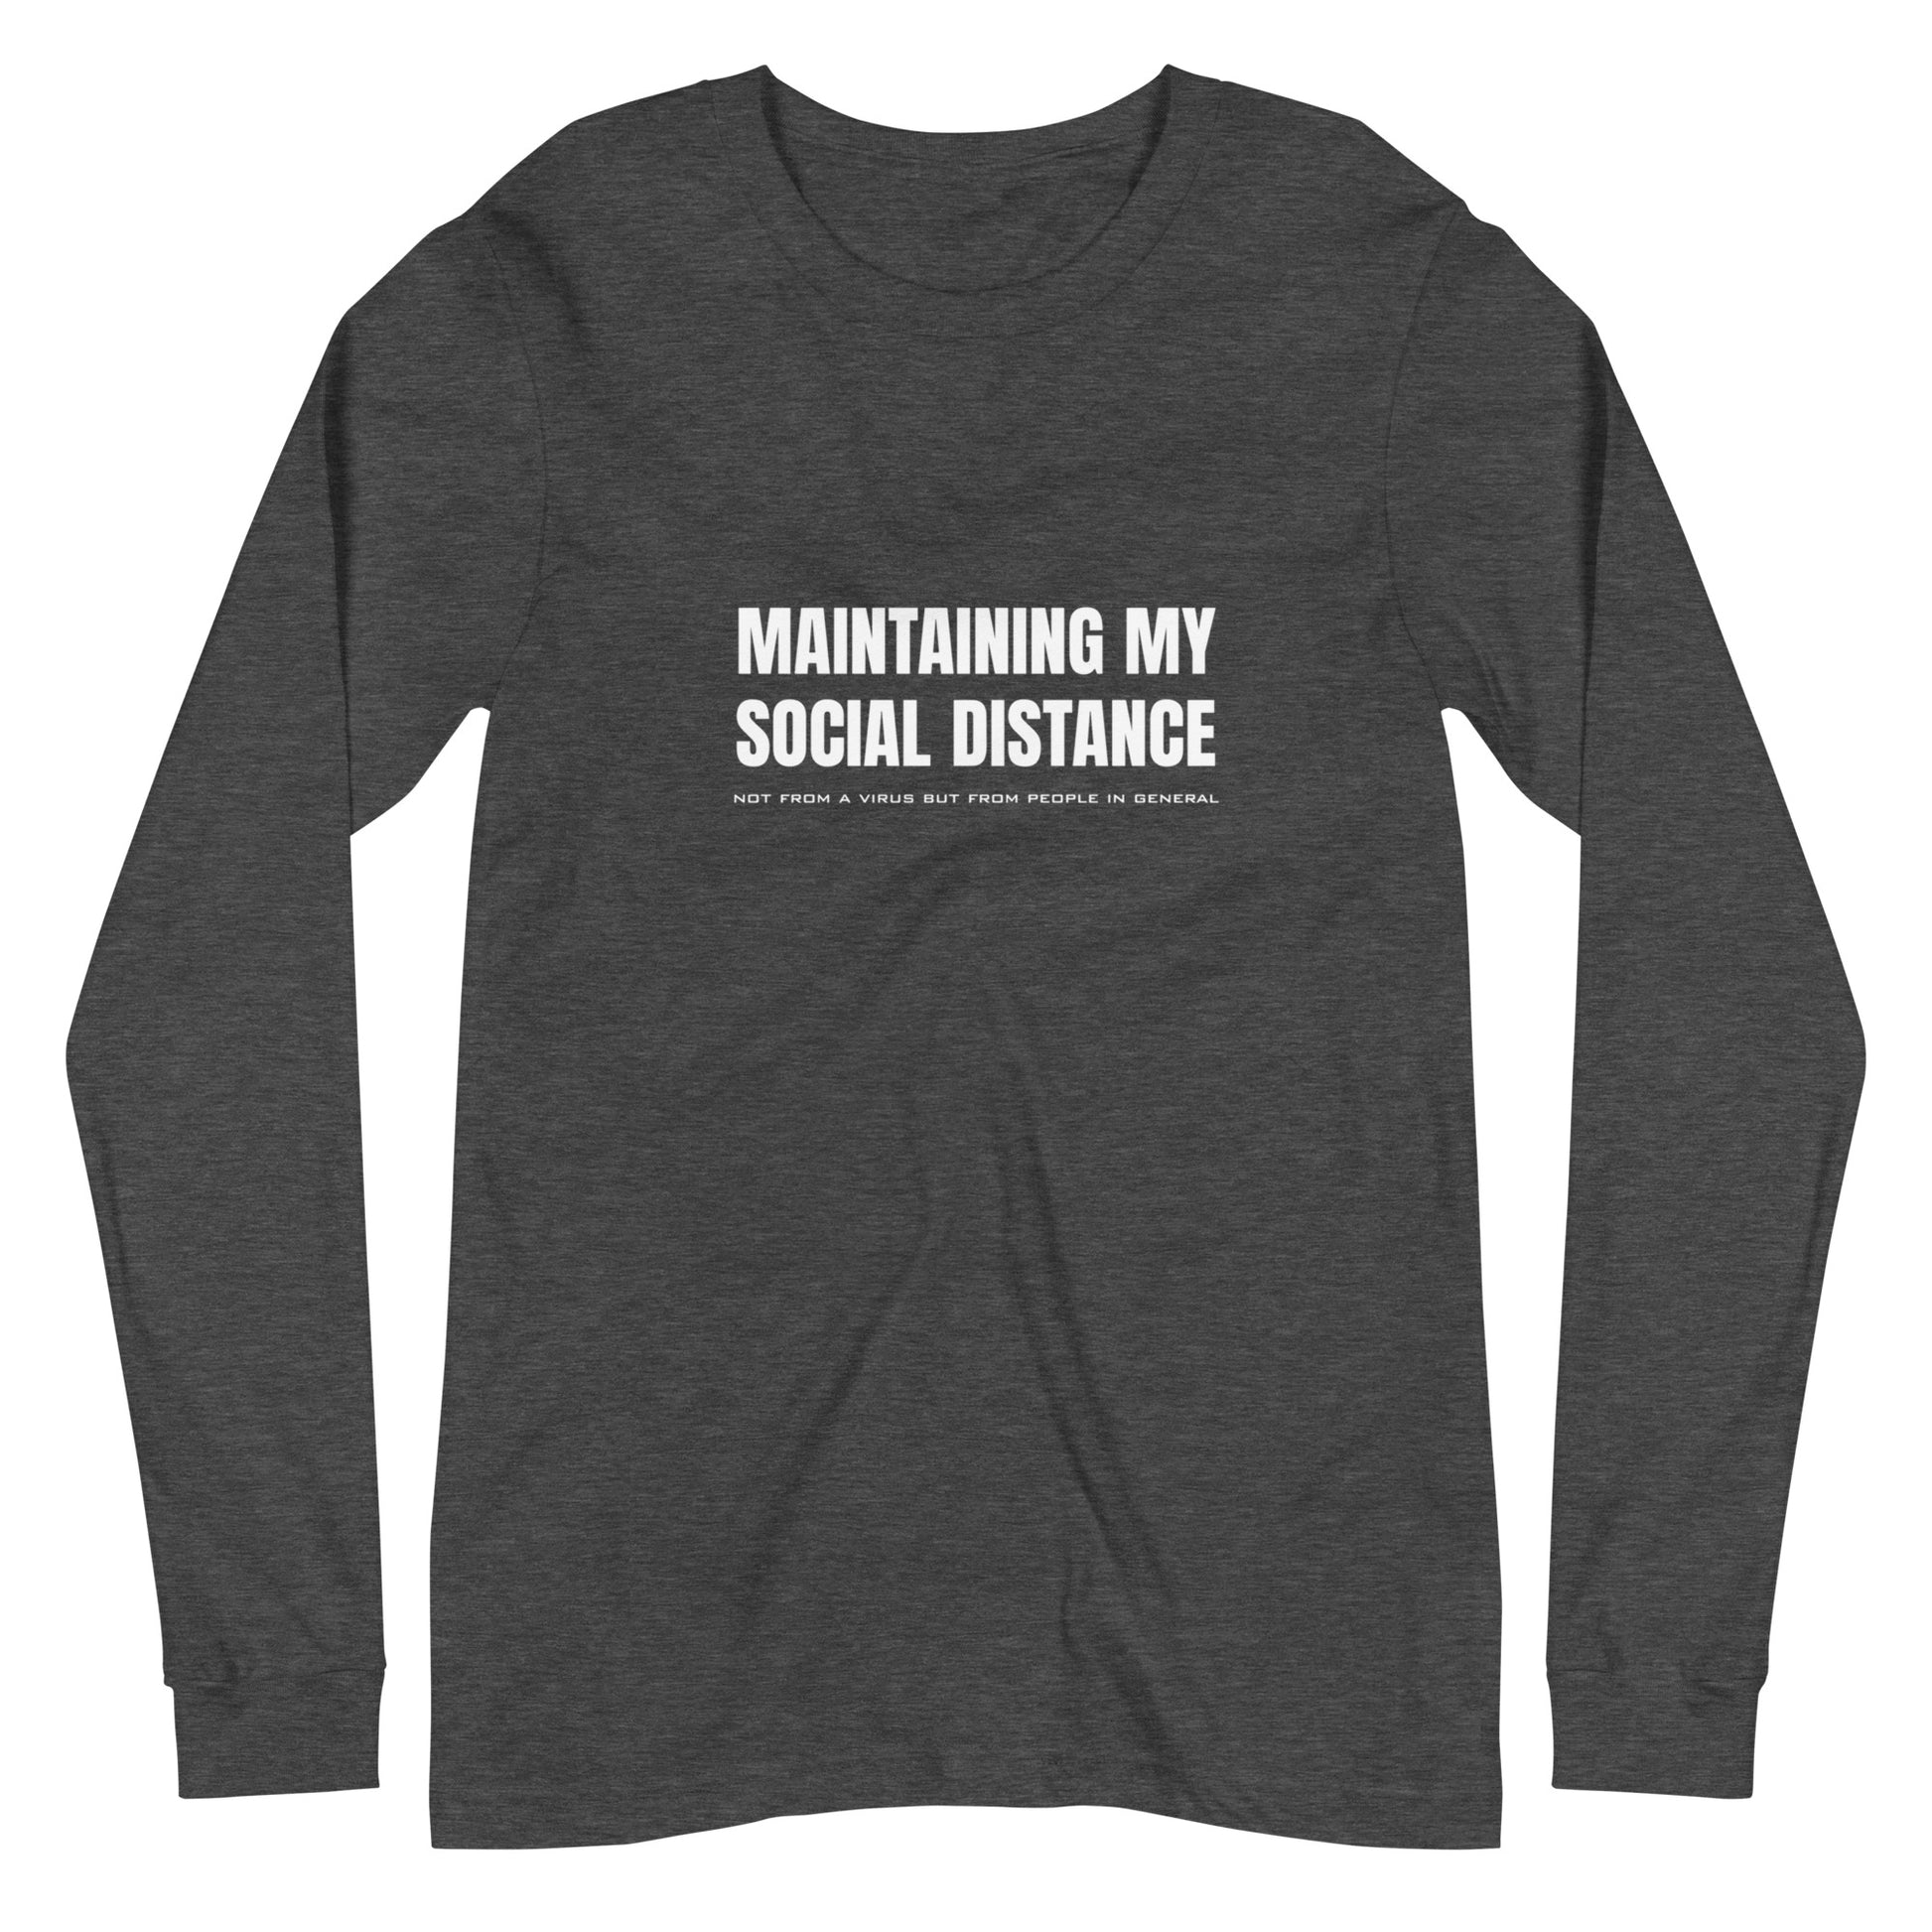 Dark Grey Heather long sleeve t-shirt with white graphic: "MAINTAINING MY SOCIAL DISTANCE not from a virus but from people in general"